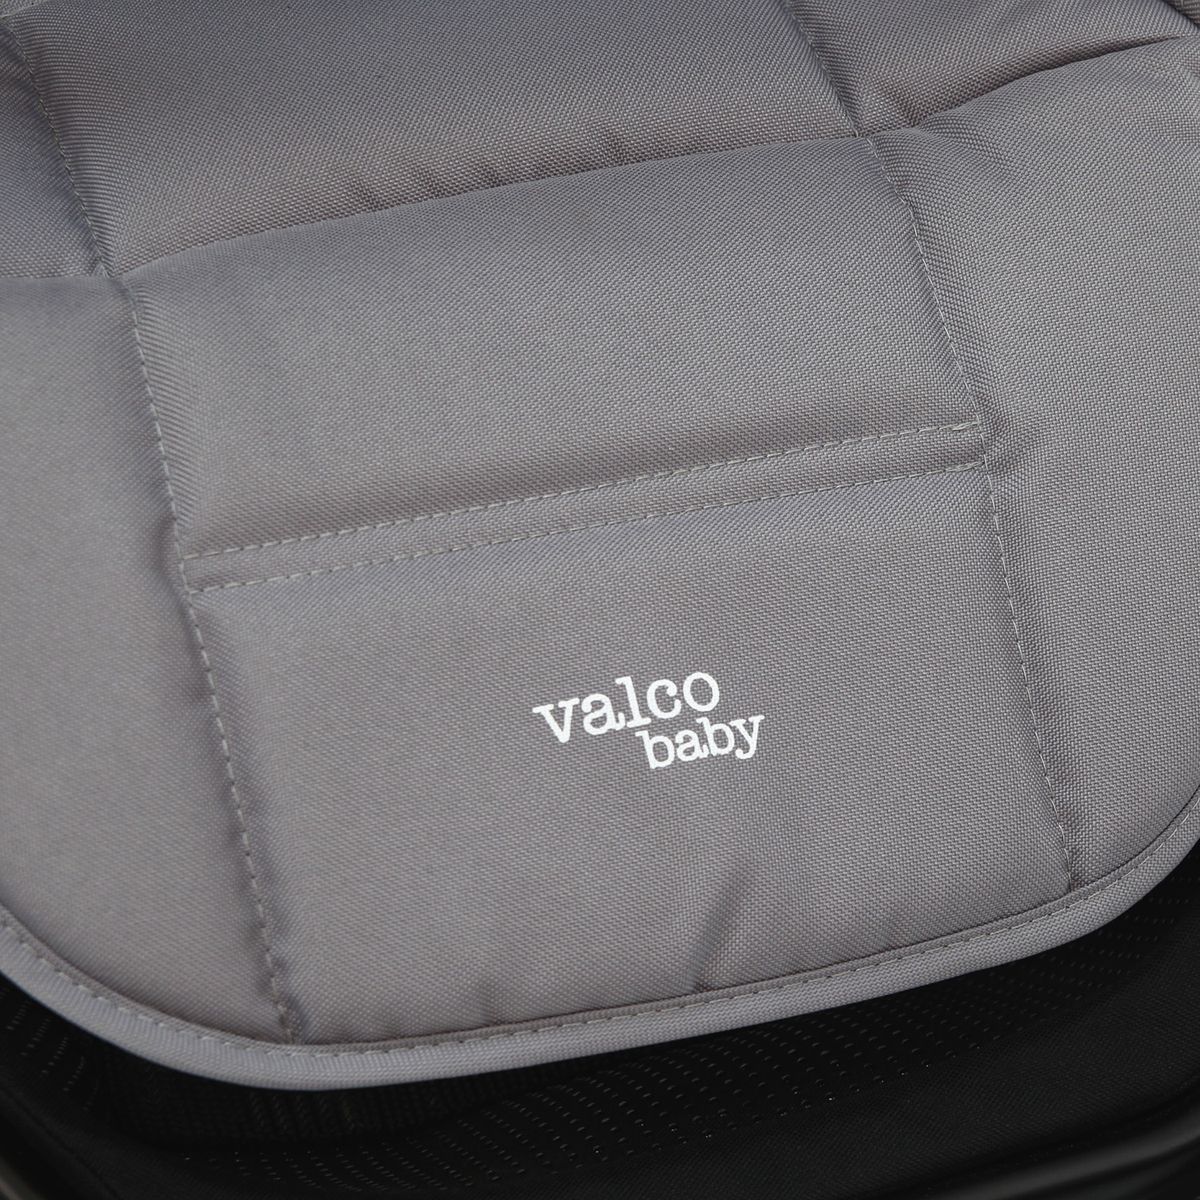   Valco Baby Snap 4 Cool Grey